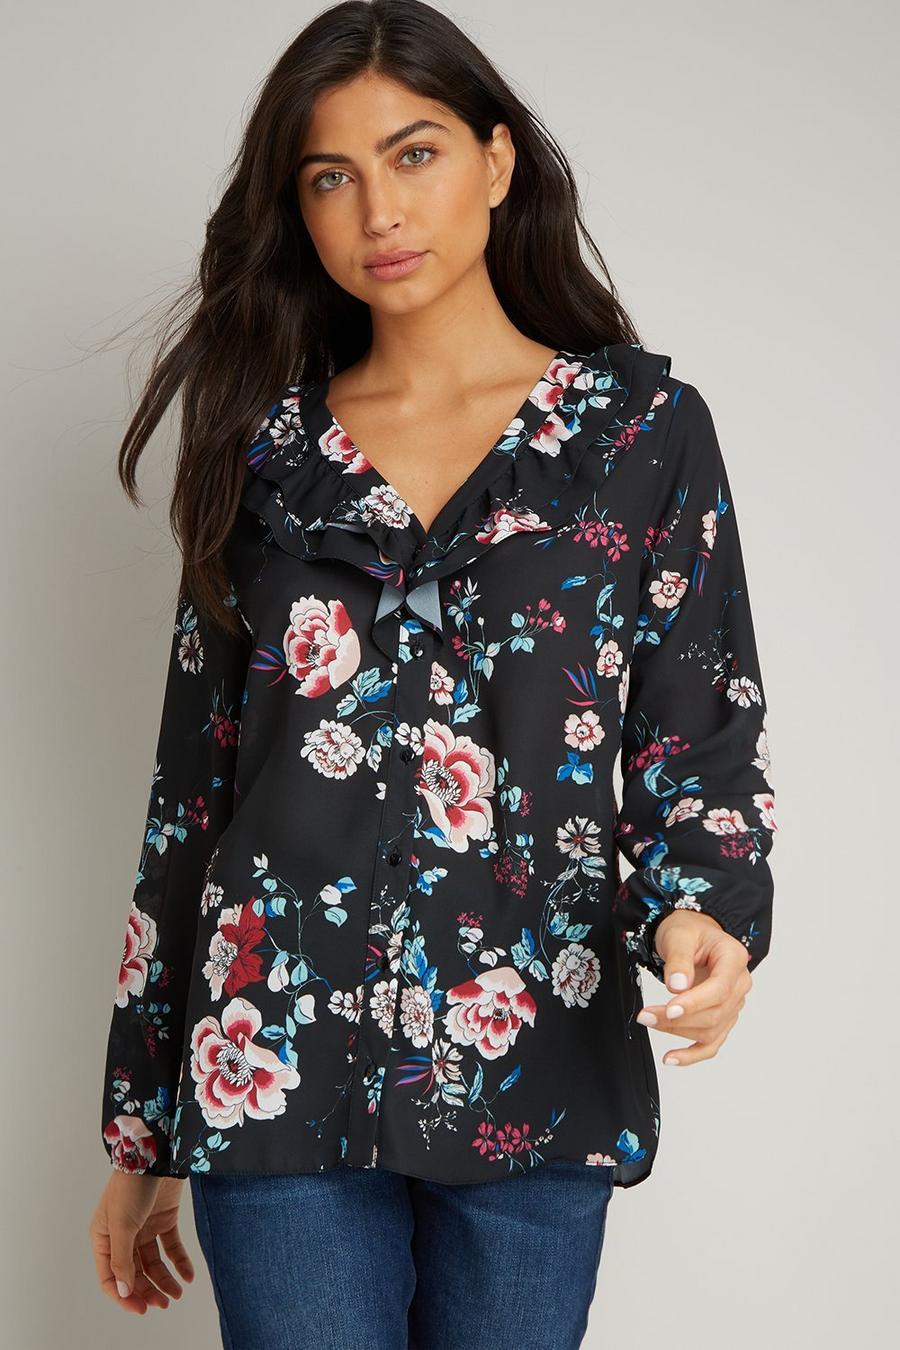 Winter Floral Ruffle Blouse